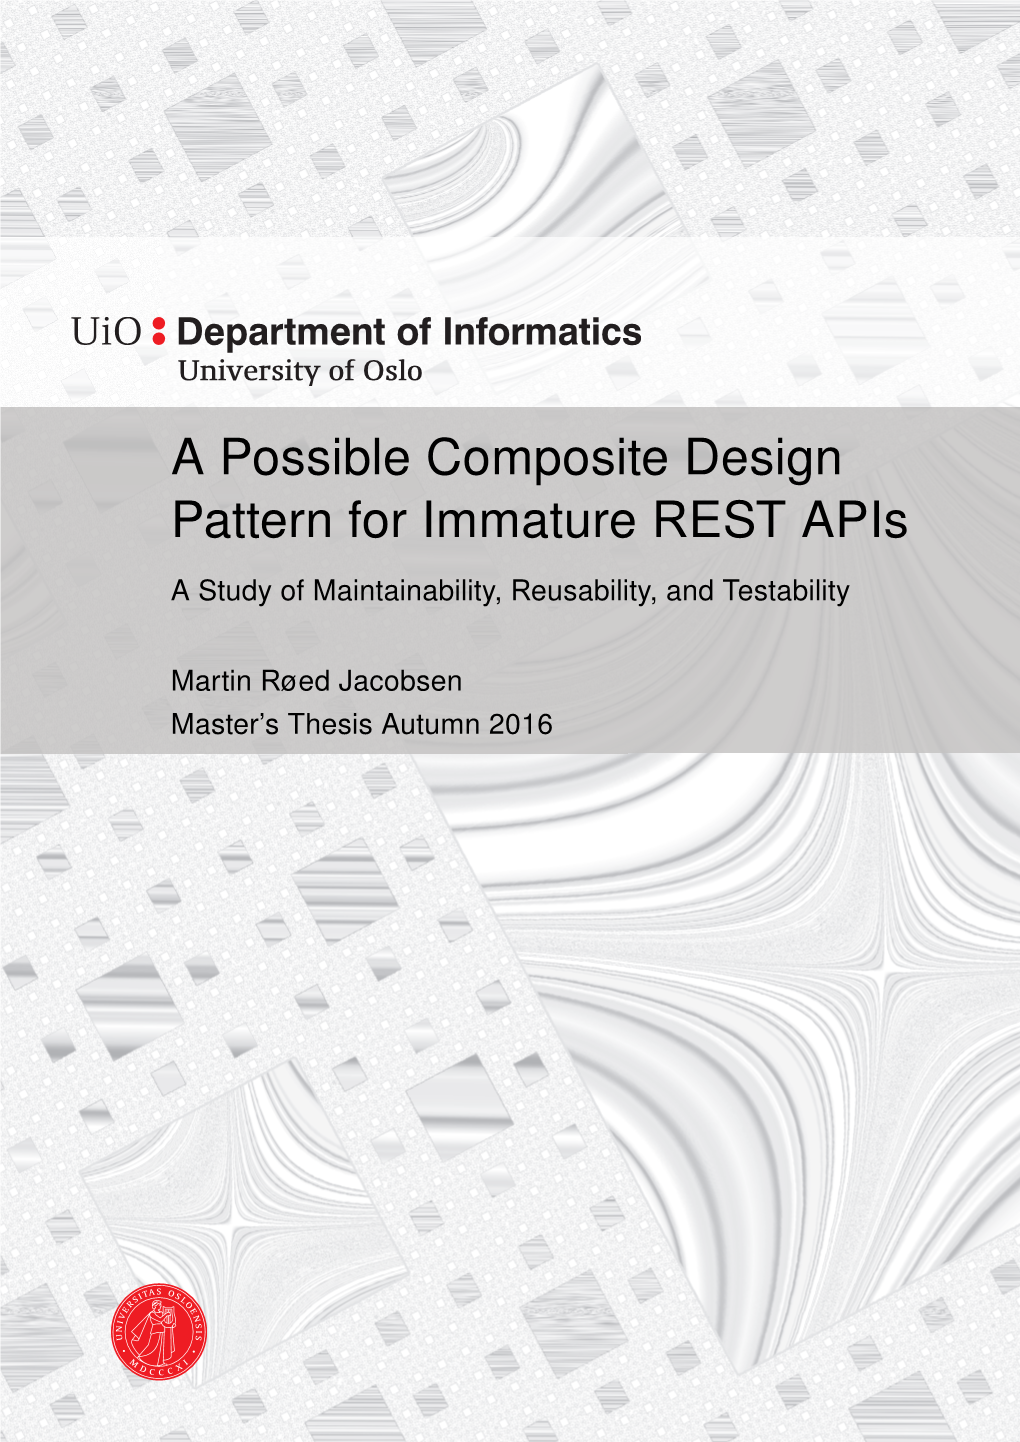 A Possible Composite Design Pattern for Immature REST Apis